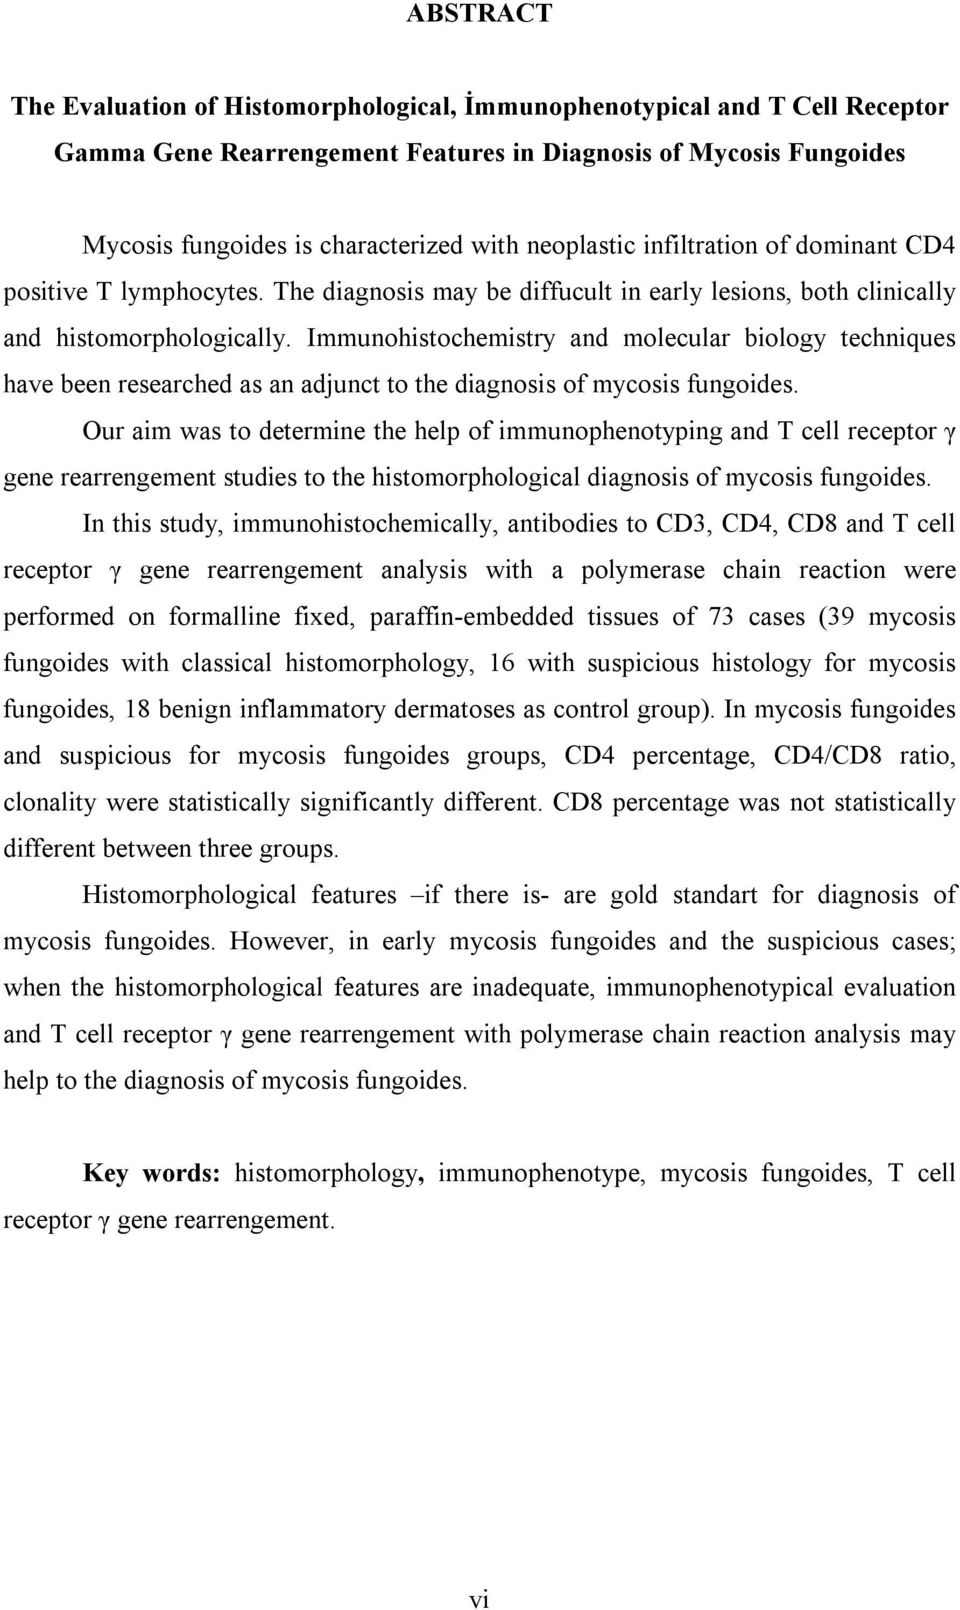 Immunohistochemistry and molecular biology techniques have been researched as an adjunct to the diagnosis of mycosis fungoides.